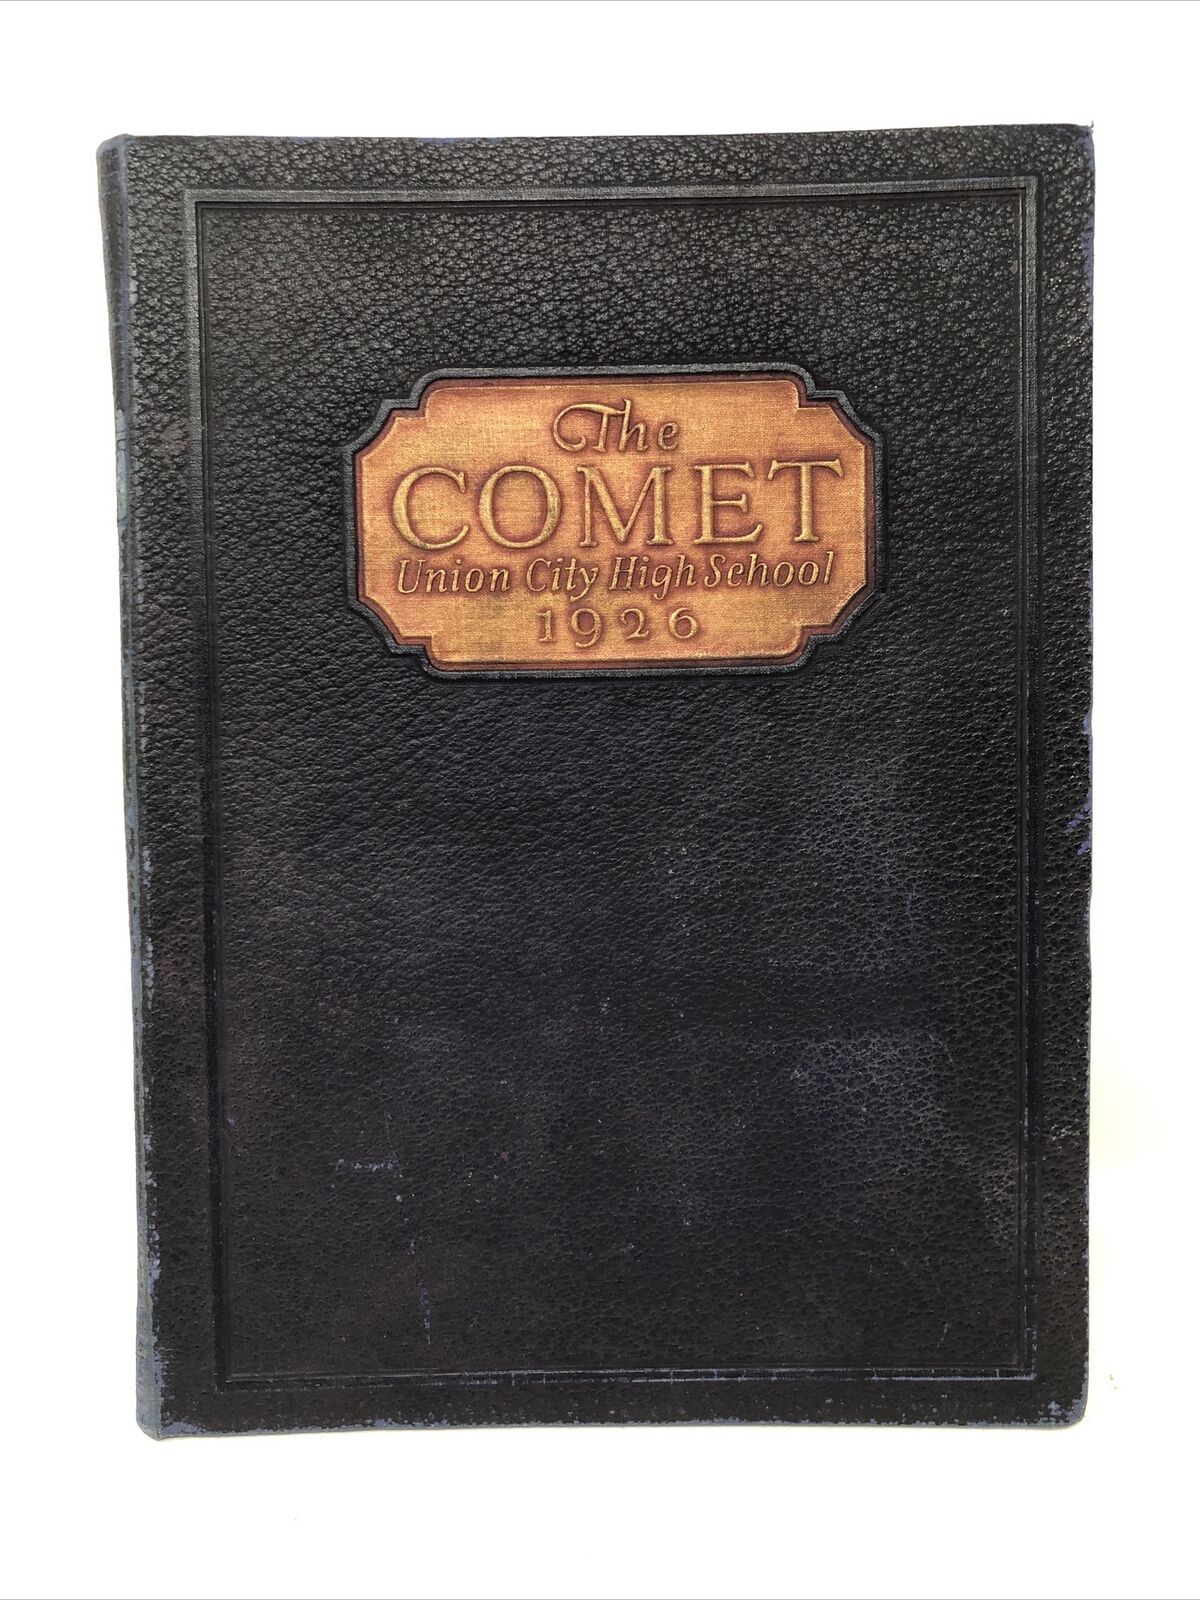 1926 Union City Tennessee Year Book The Comet High School Annual 